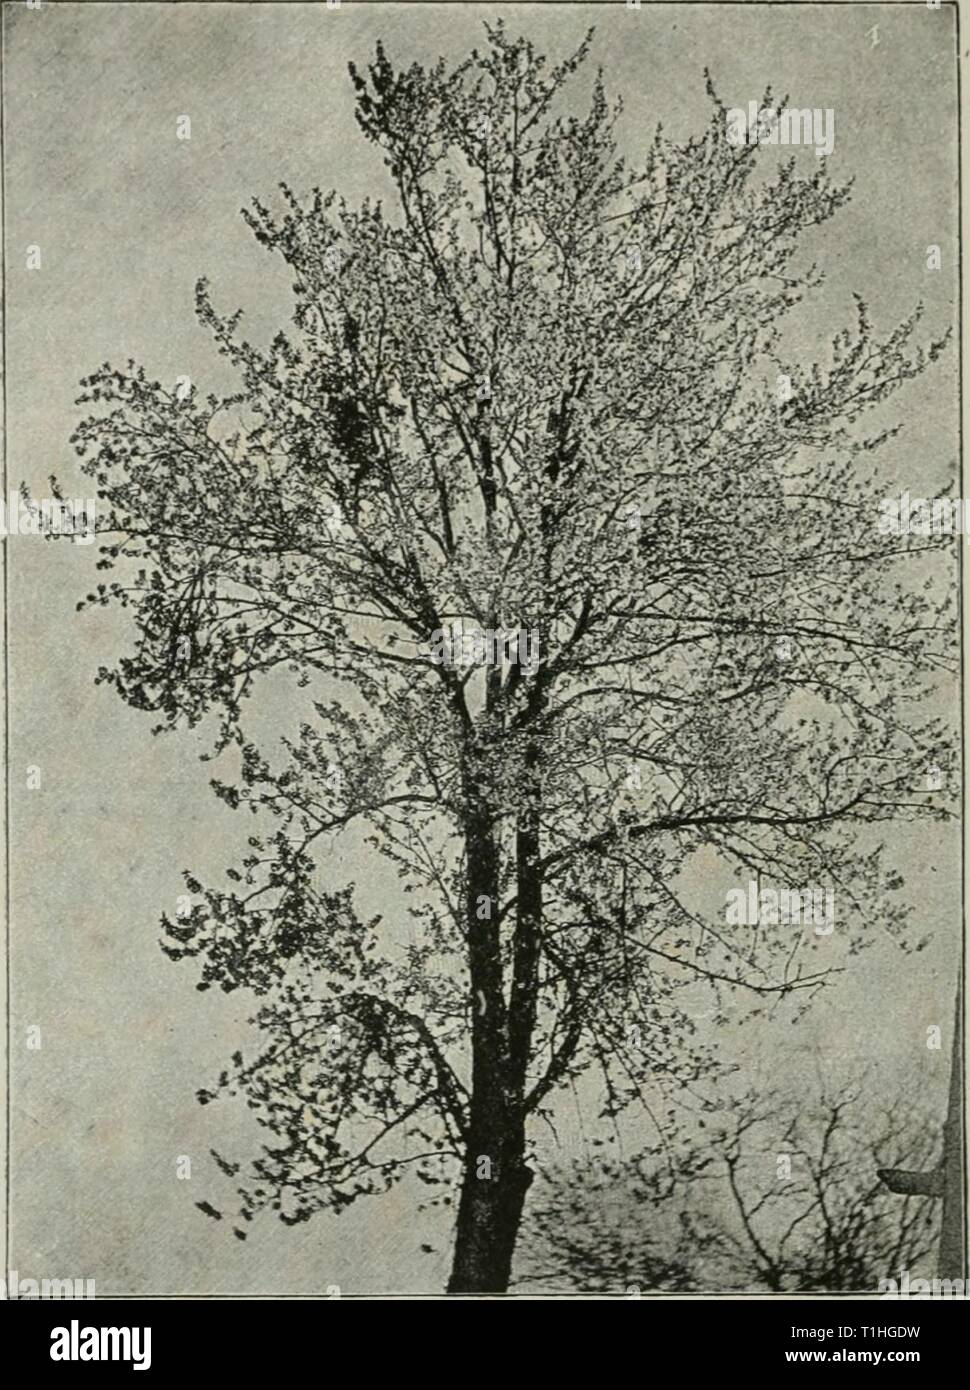 Diseases of plants induced by Diseases of plants induced by cryptogamic parasites; introduction to the study of pathogenic Fungi, slime-Fungi, bacteria, & Algae  diseasesofplant00tube Year: 1897  162 ASCOMYCETES. into the inner tissues of newly-formed twigs and leaves. The mycelium of Ex. alpinus passes the winter in the buds, spreading thence in spring into young twigs and leaves.    Fig. 57.—Exoascus cerasi on Prunus droius. Cherry-tree iii blossom, with the exception of four witches' brooms. The tree is as yet leafless except the brooms, which are in full foliage and show up dark. (v. Tubeu Stock Photo